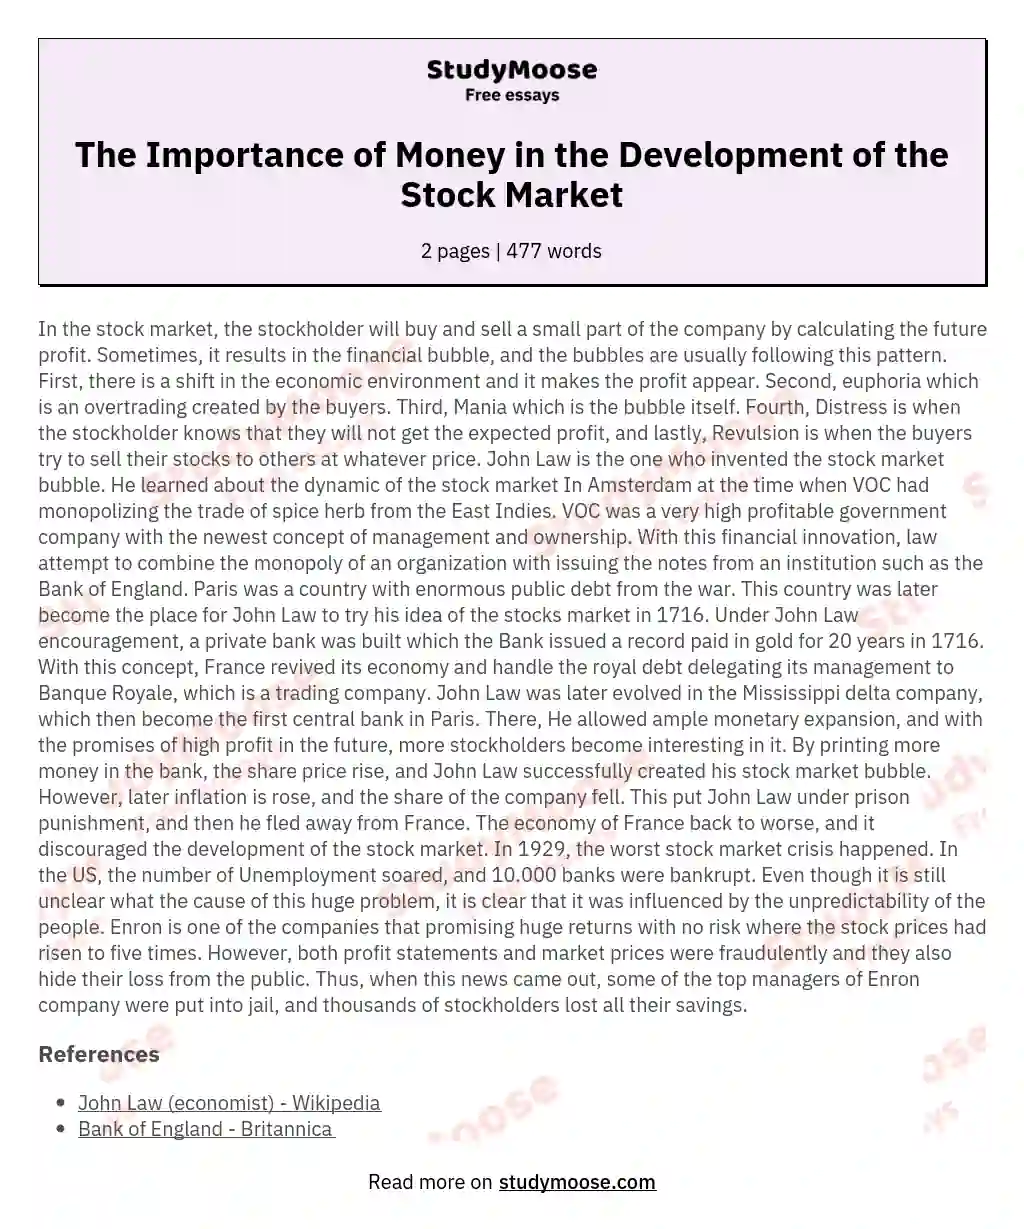 The Importance of Money in the Development of the Stock Market essay